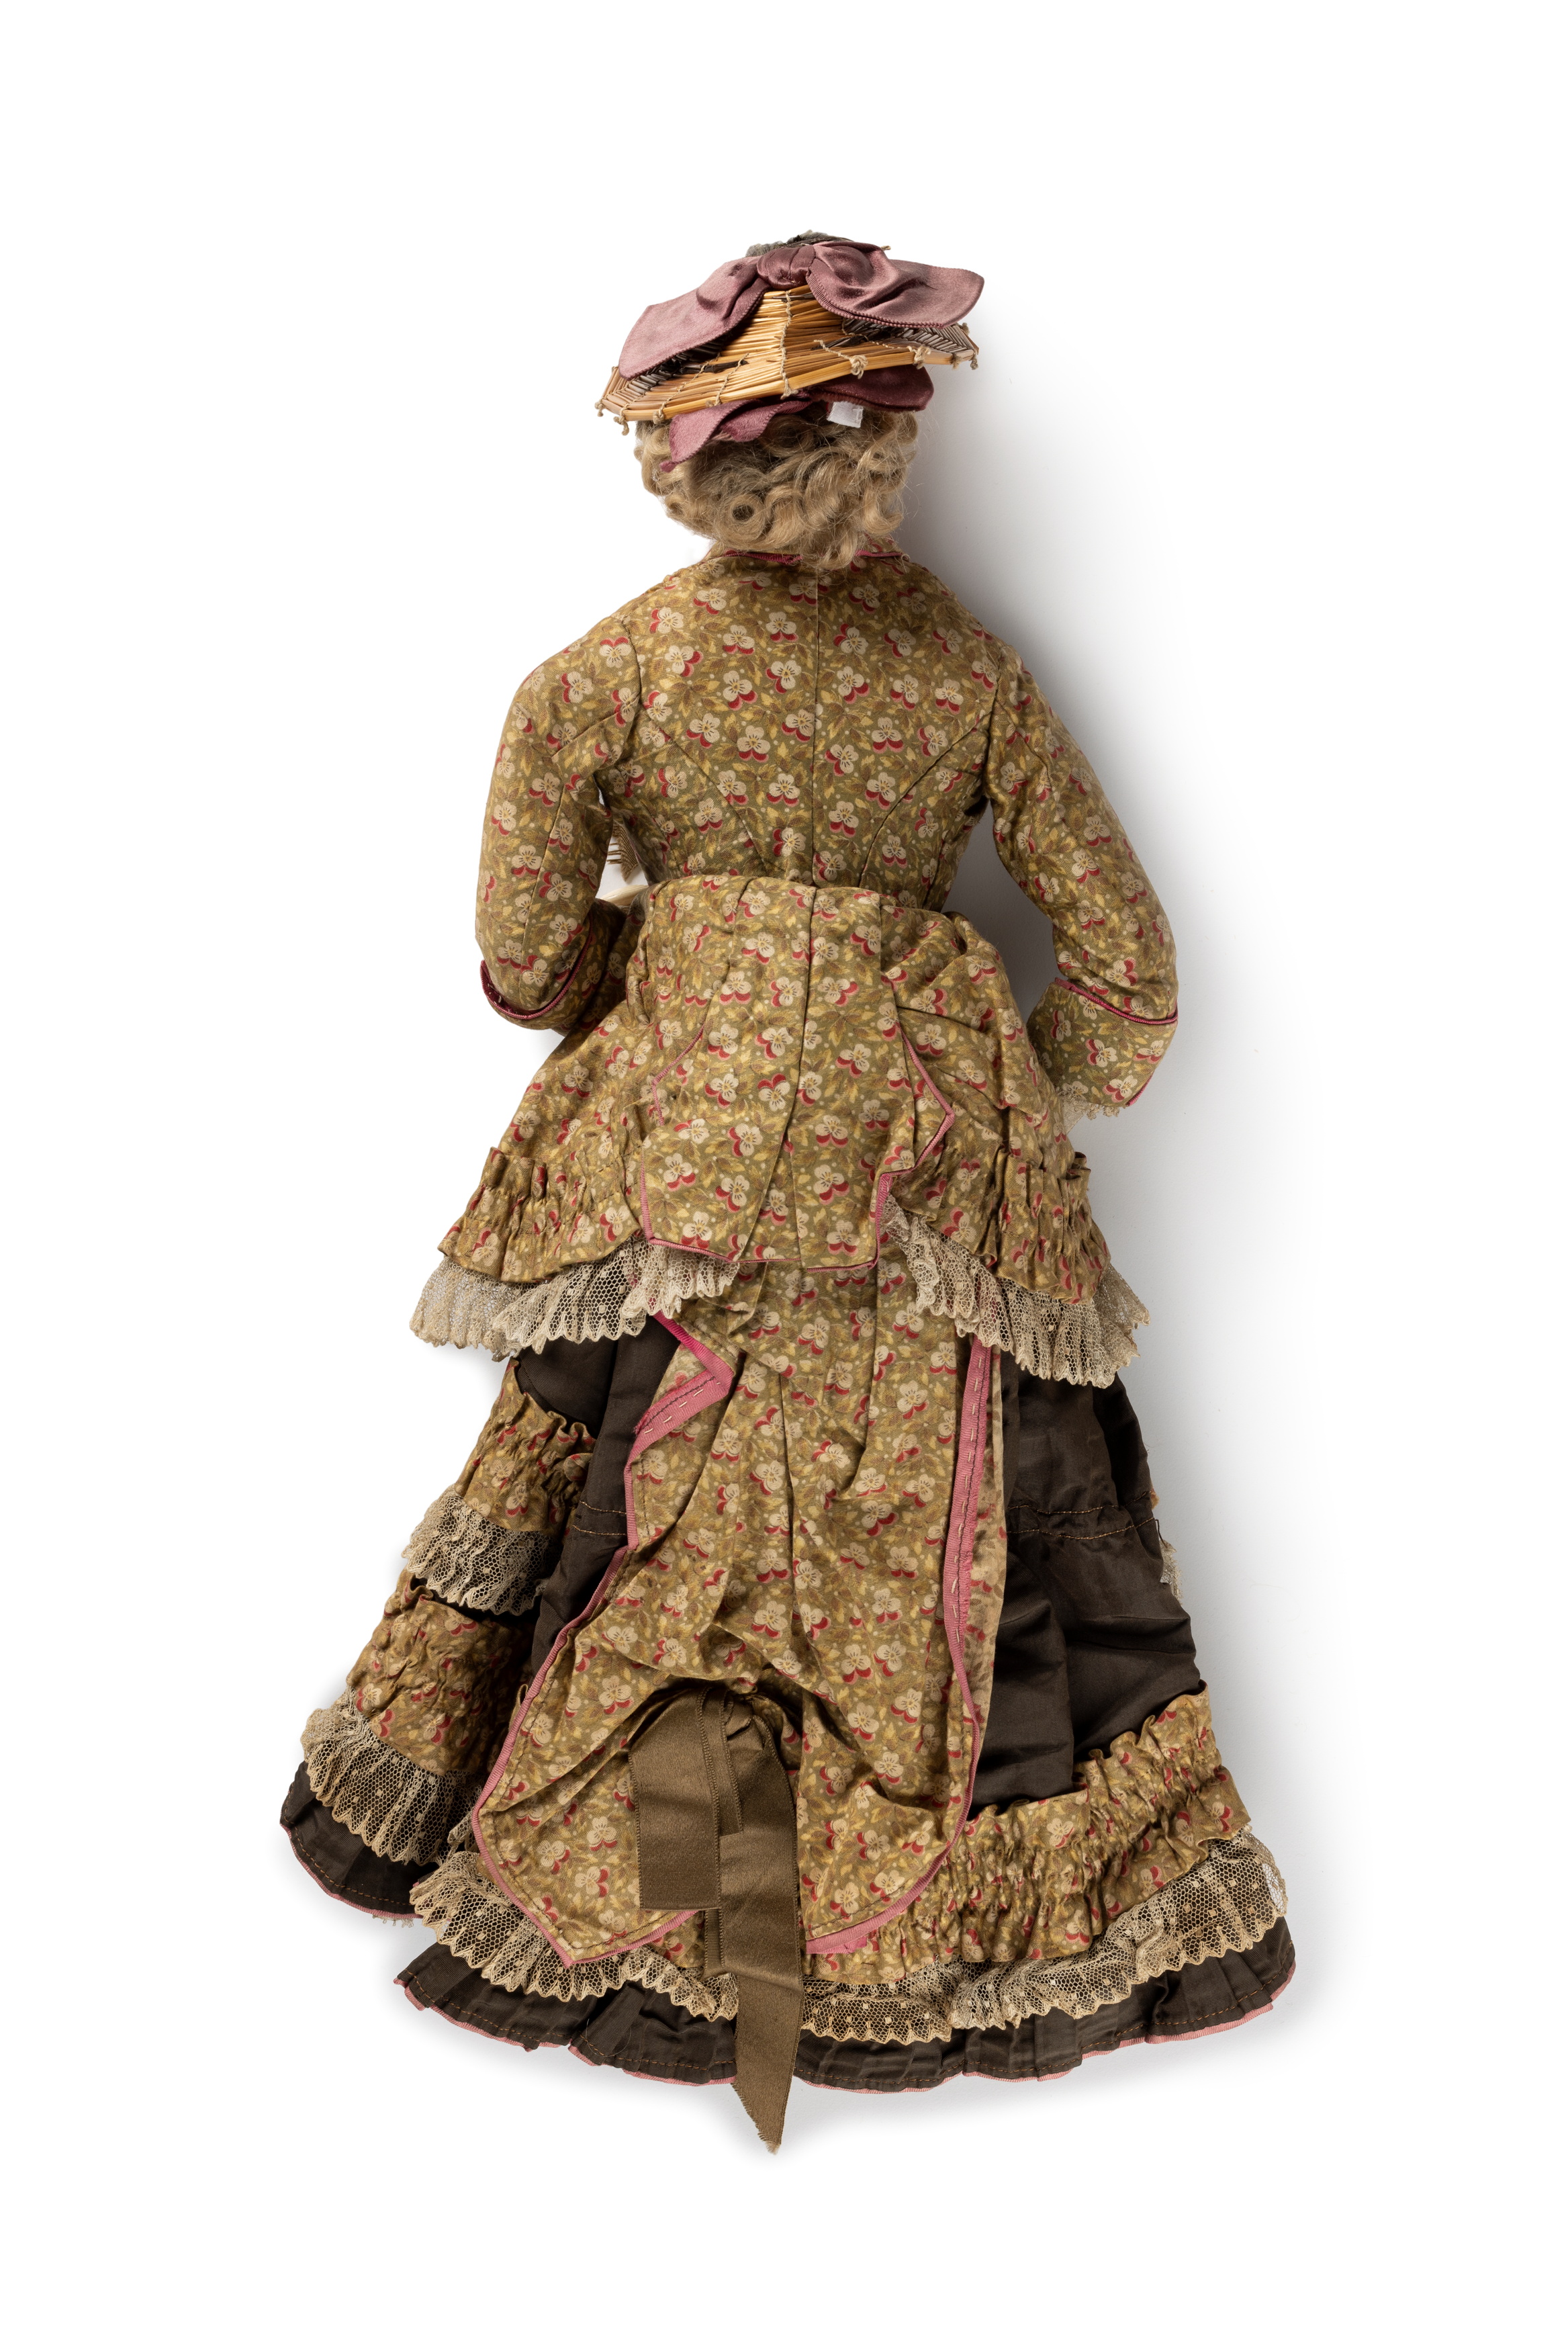 Bisque fashion doll and accessories by Edouard Chauviere